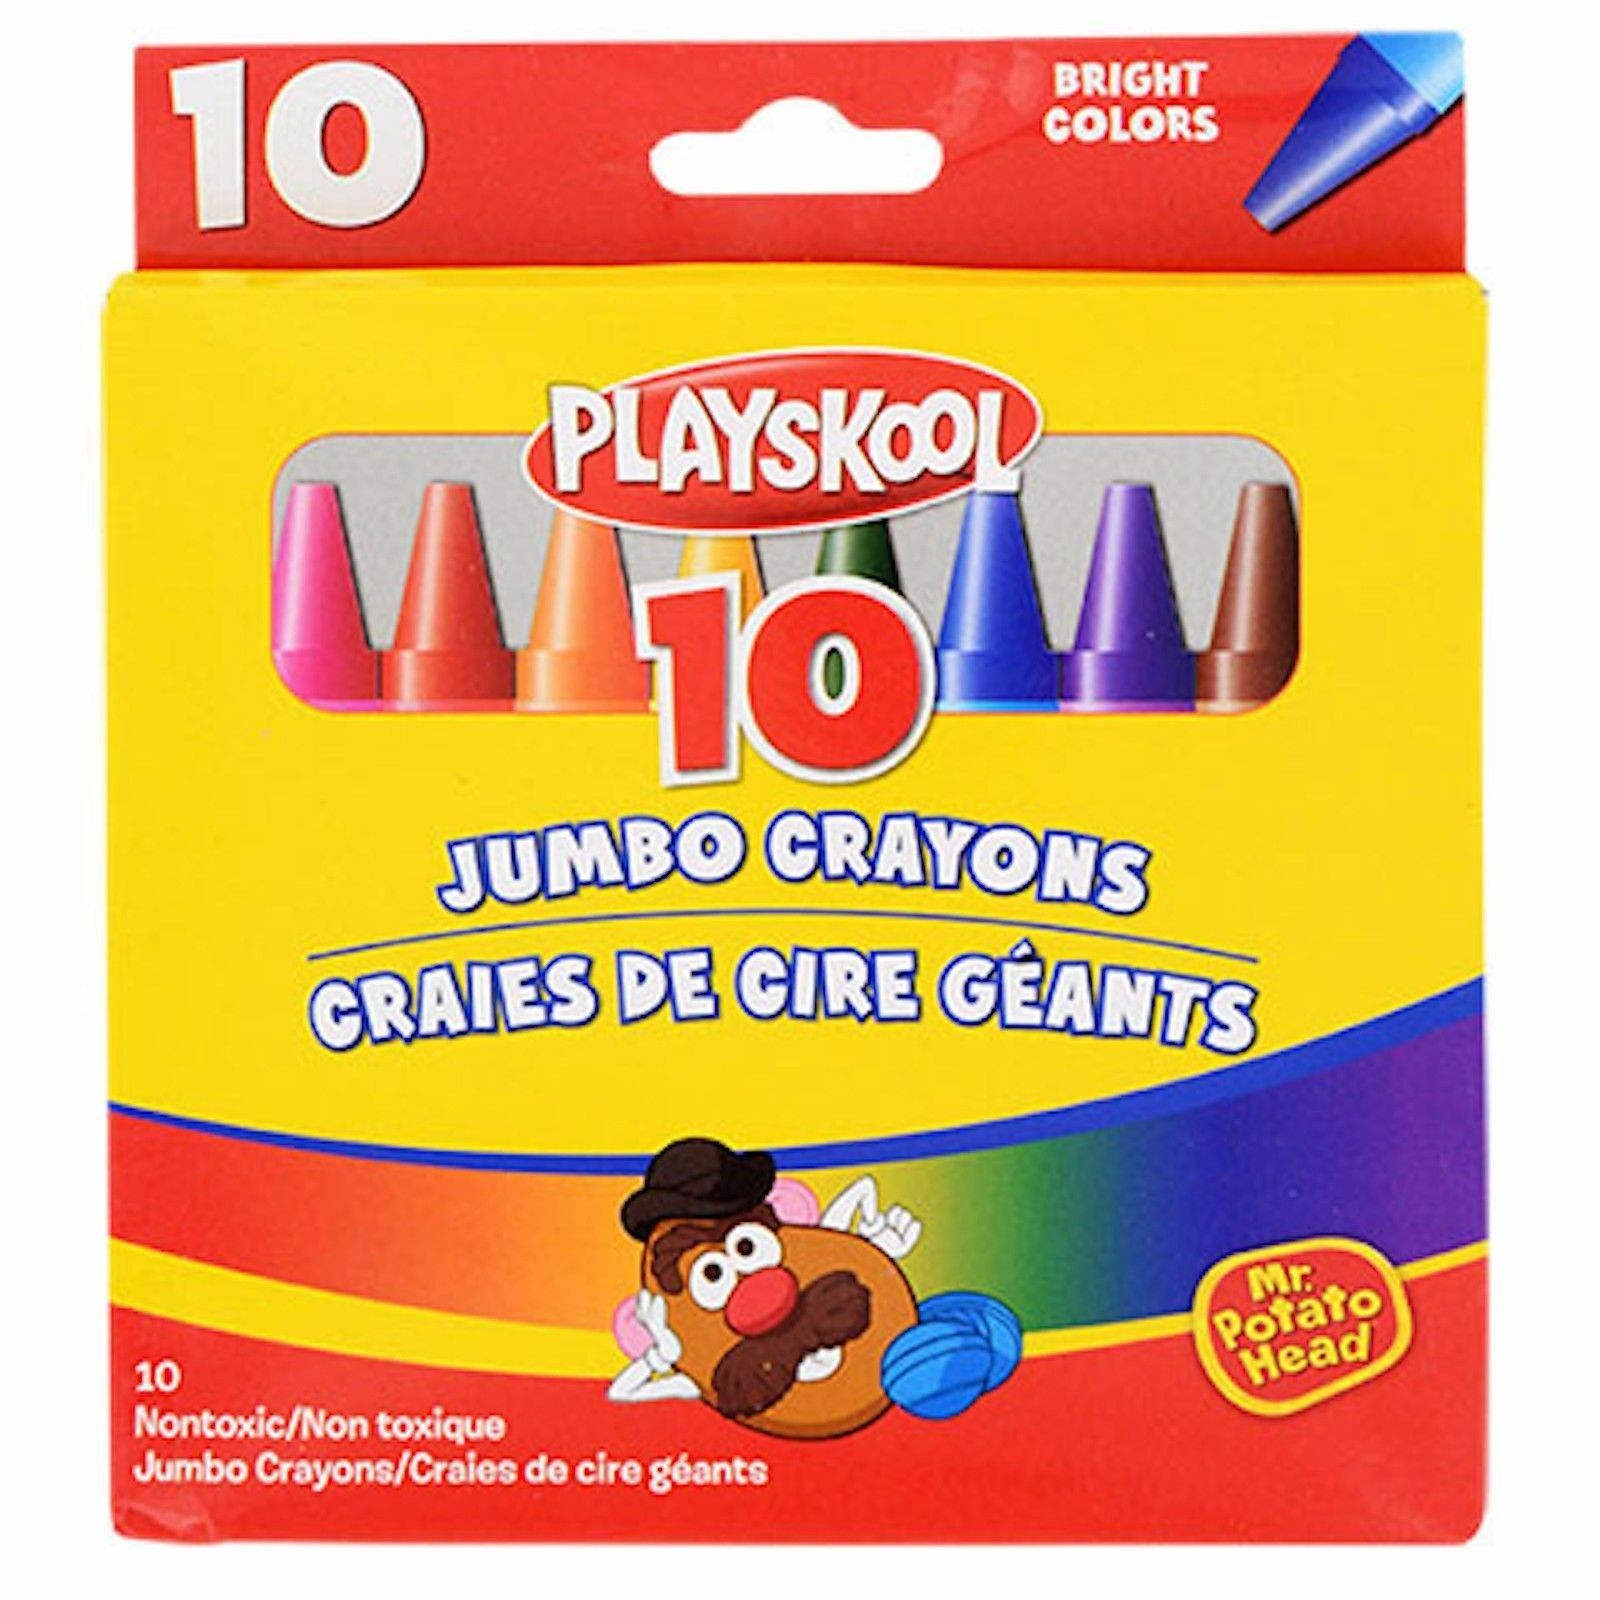 Playskool Jumbo Crayons For Kids, Non-toxic, 10 Count Bright Colors